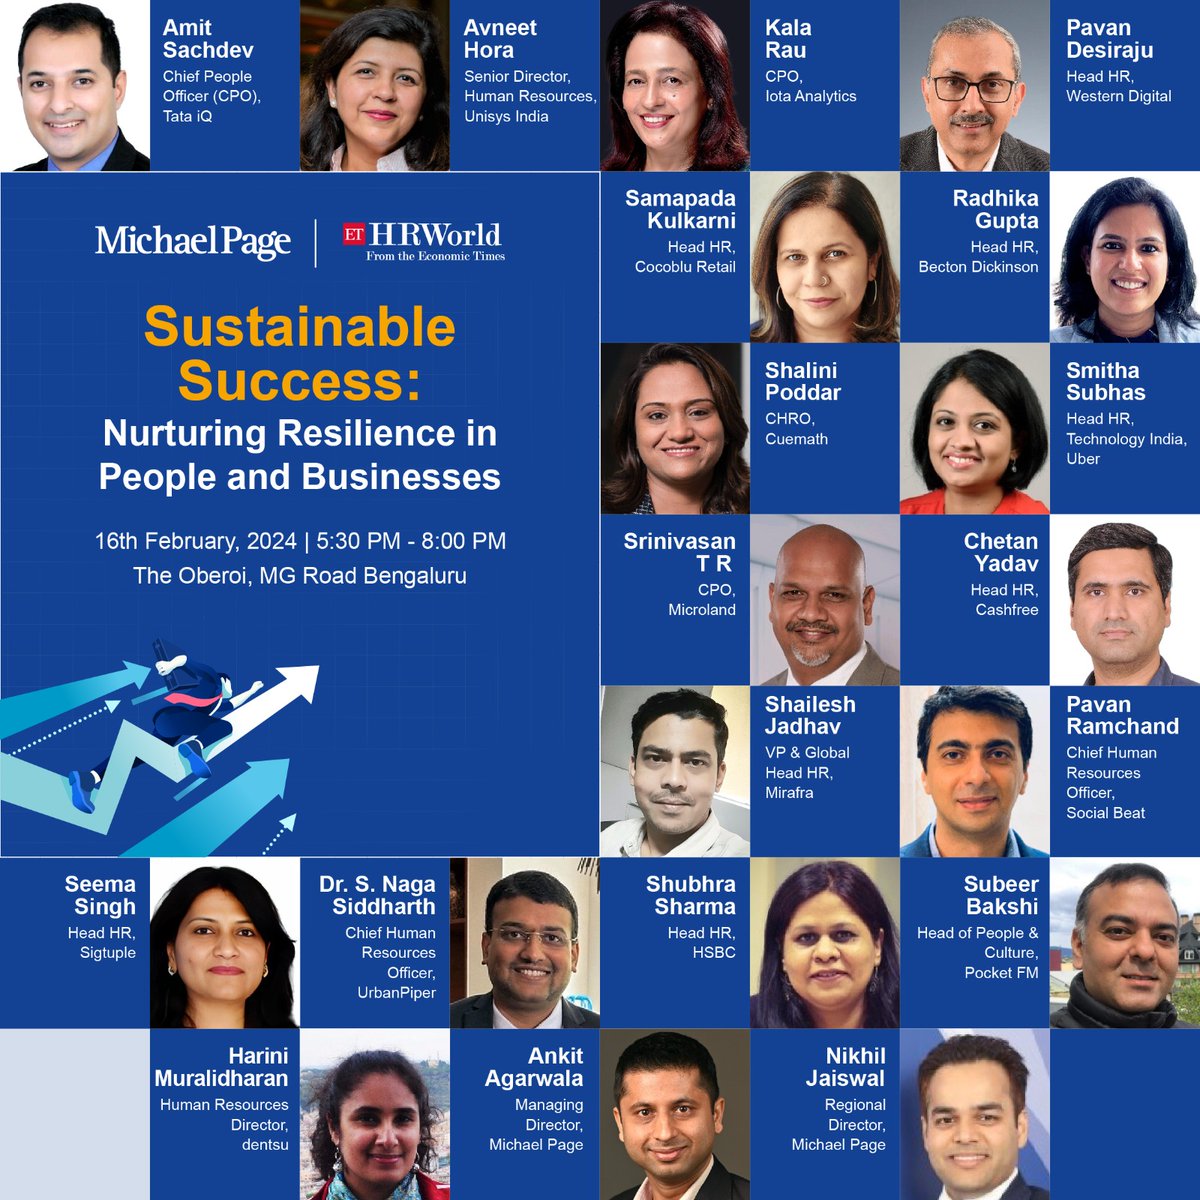 ETHRWorld, in collaboration with Michael Page, is organizing an engaging roundtable discussion on “Sustainable Success: Nurturing Resilience in People and Business.” 

#ETHRWorld #BusinessResilience #SustainableSuccess #EmployeeExperience #WorkforceDiversity